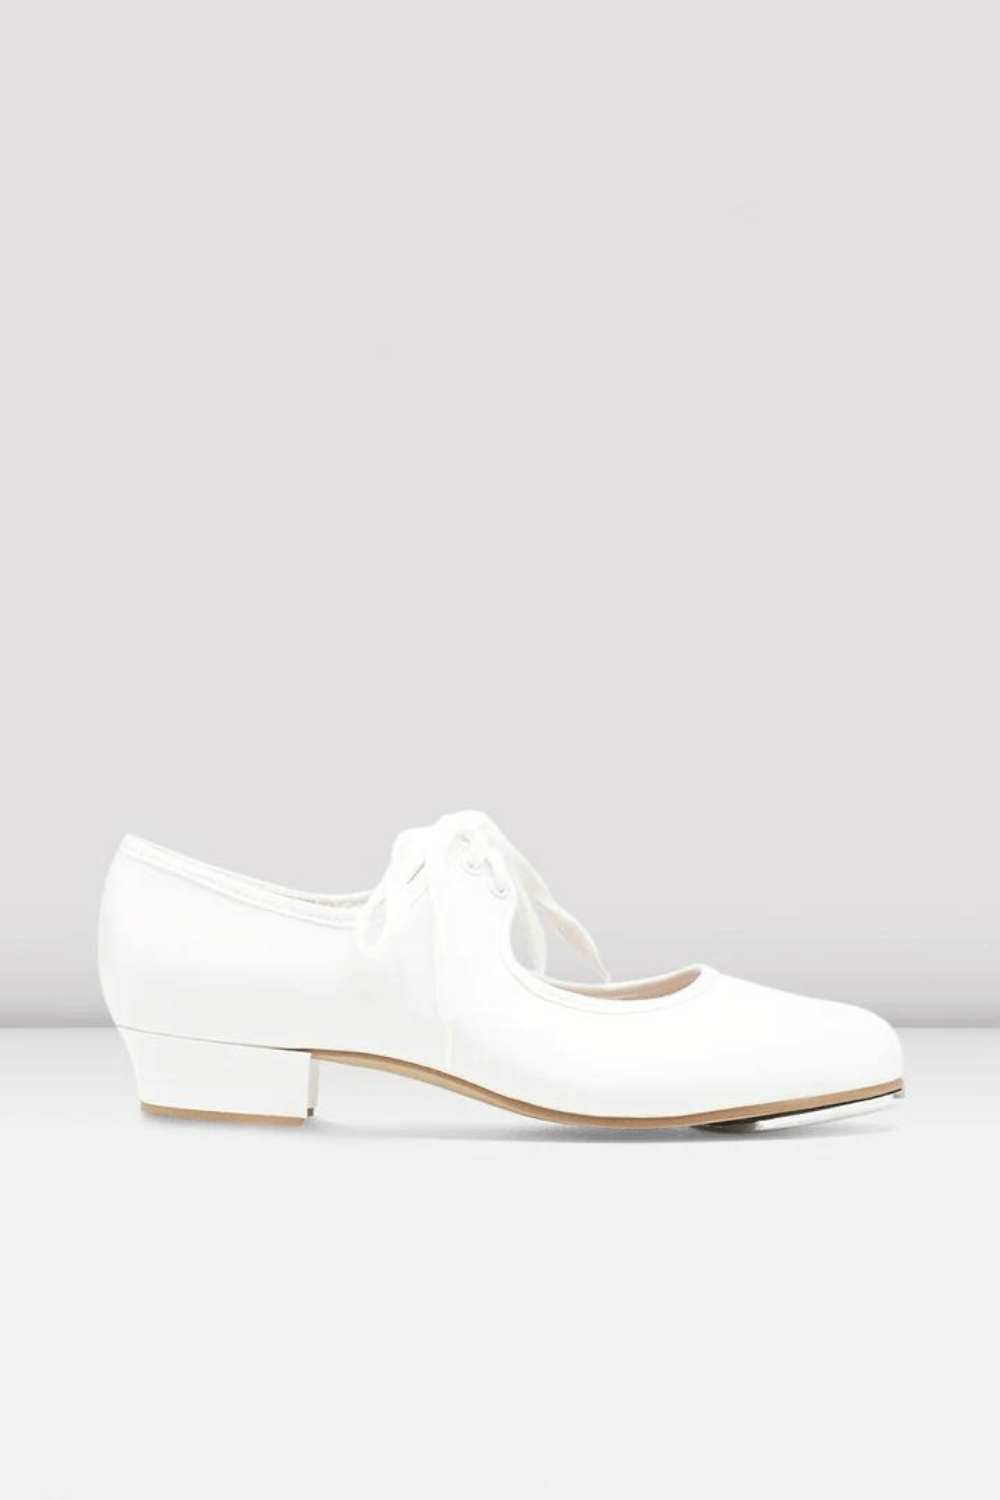 BLOCH Childrens Shirley Tie-Up Tap Shoes, White Synthetic Leather